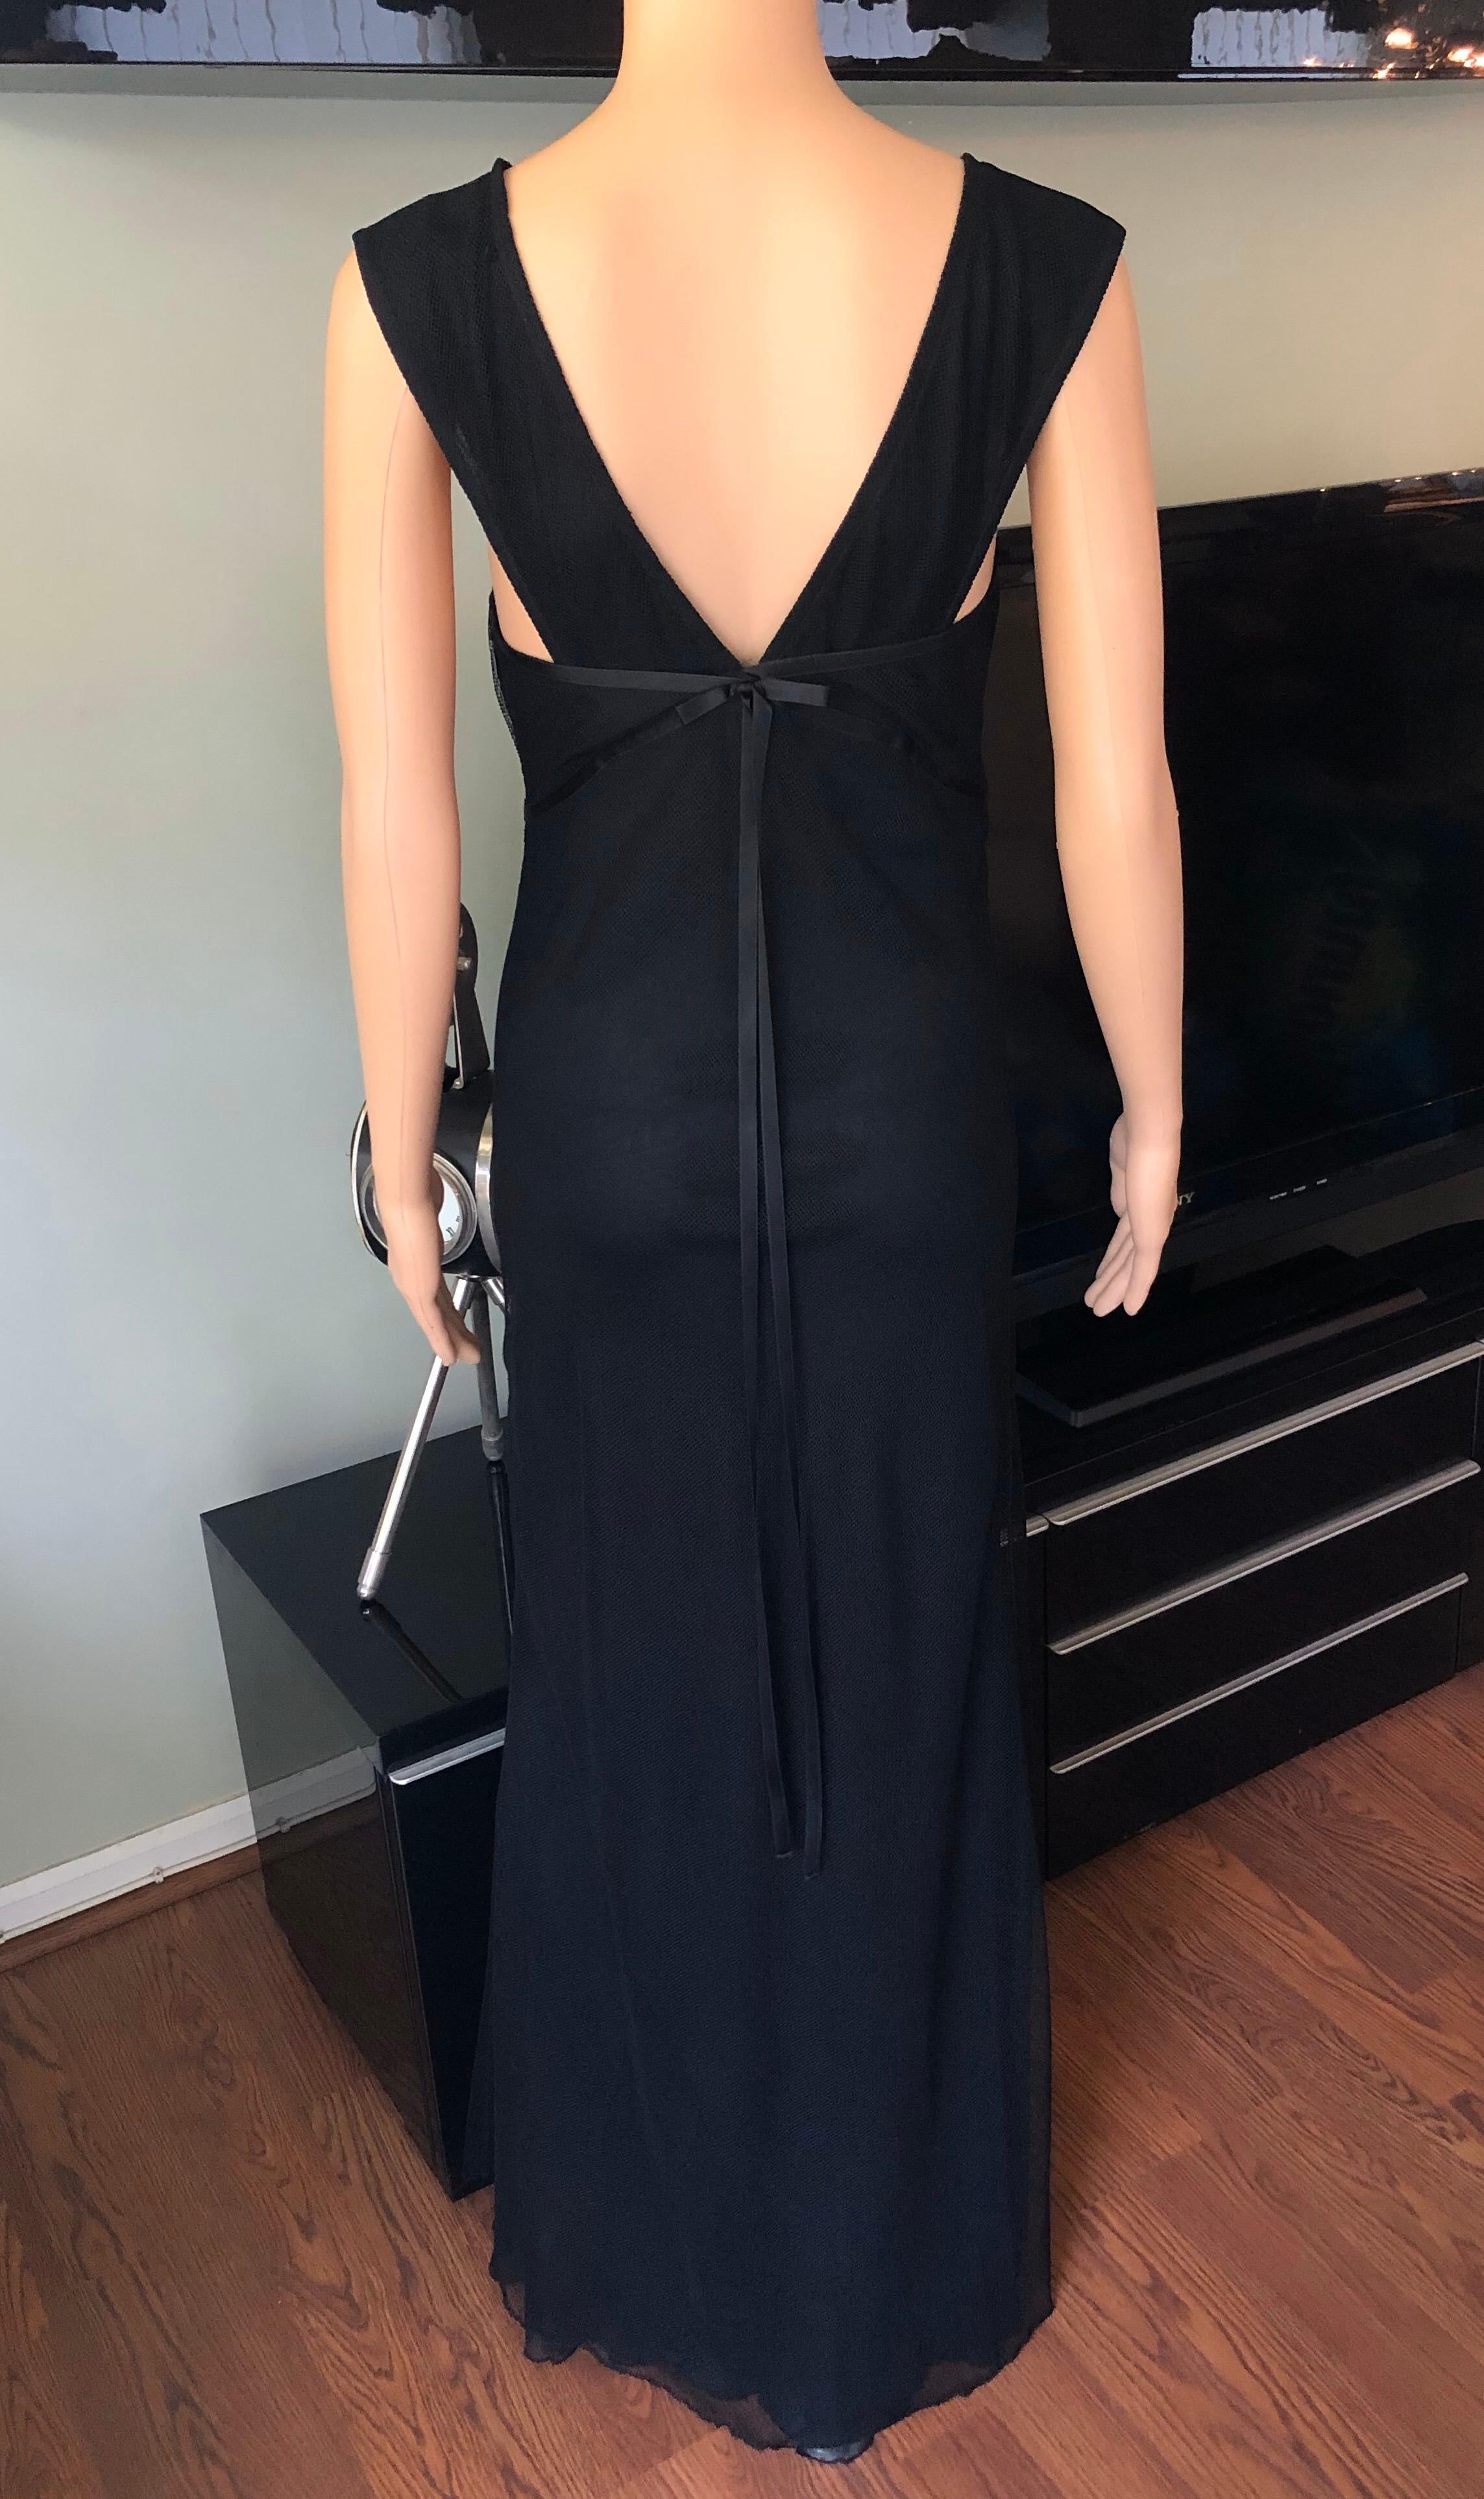 Tom Ford for Gucci F/W 2001 Plunging Draped Mesh Black Evening Dress Gown In Good Condition For Sale In Naples, FL